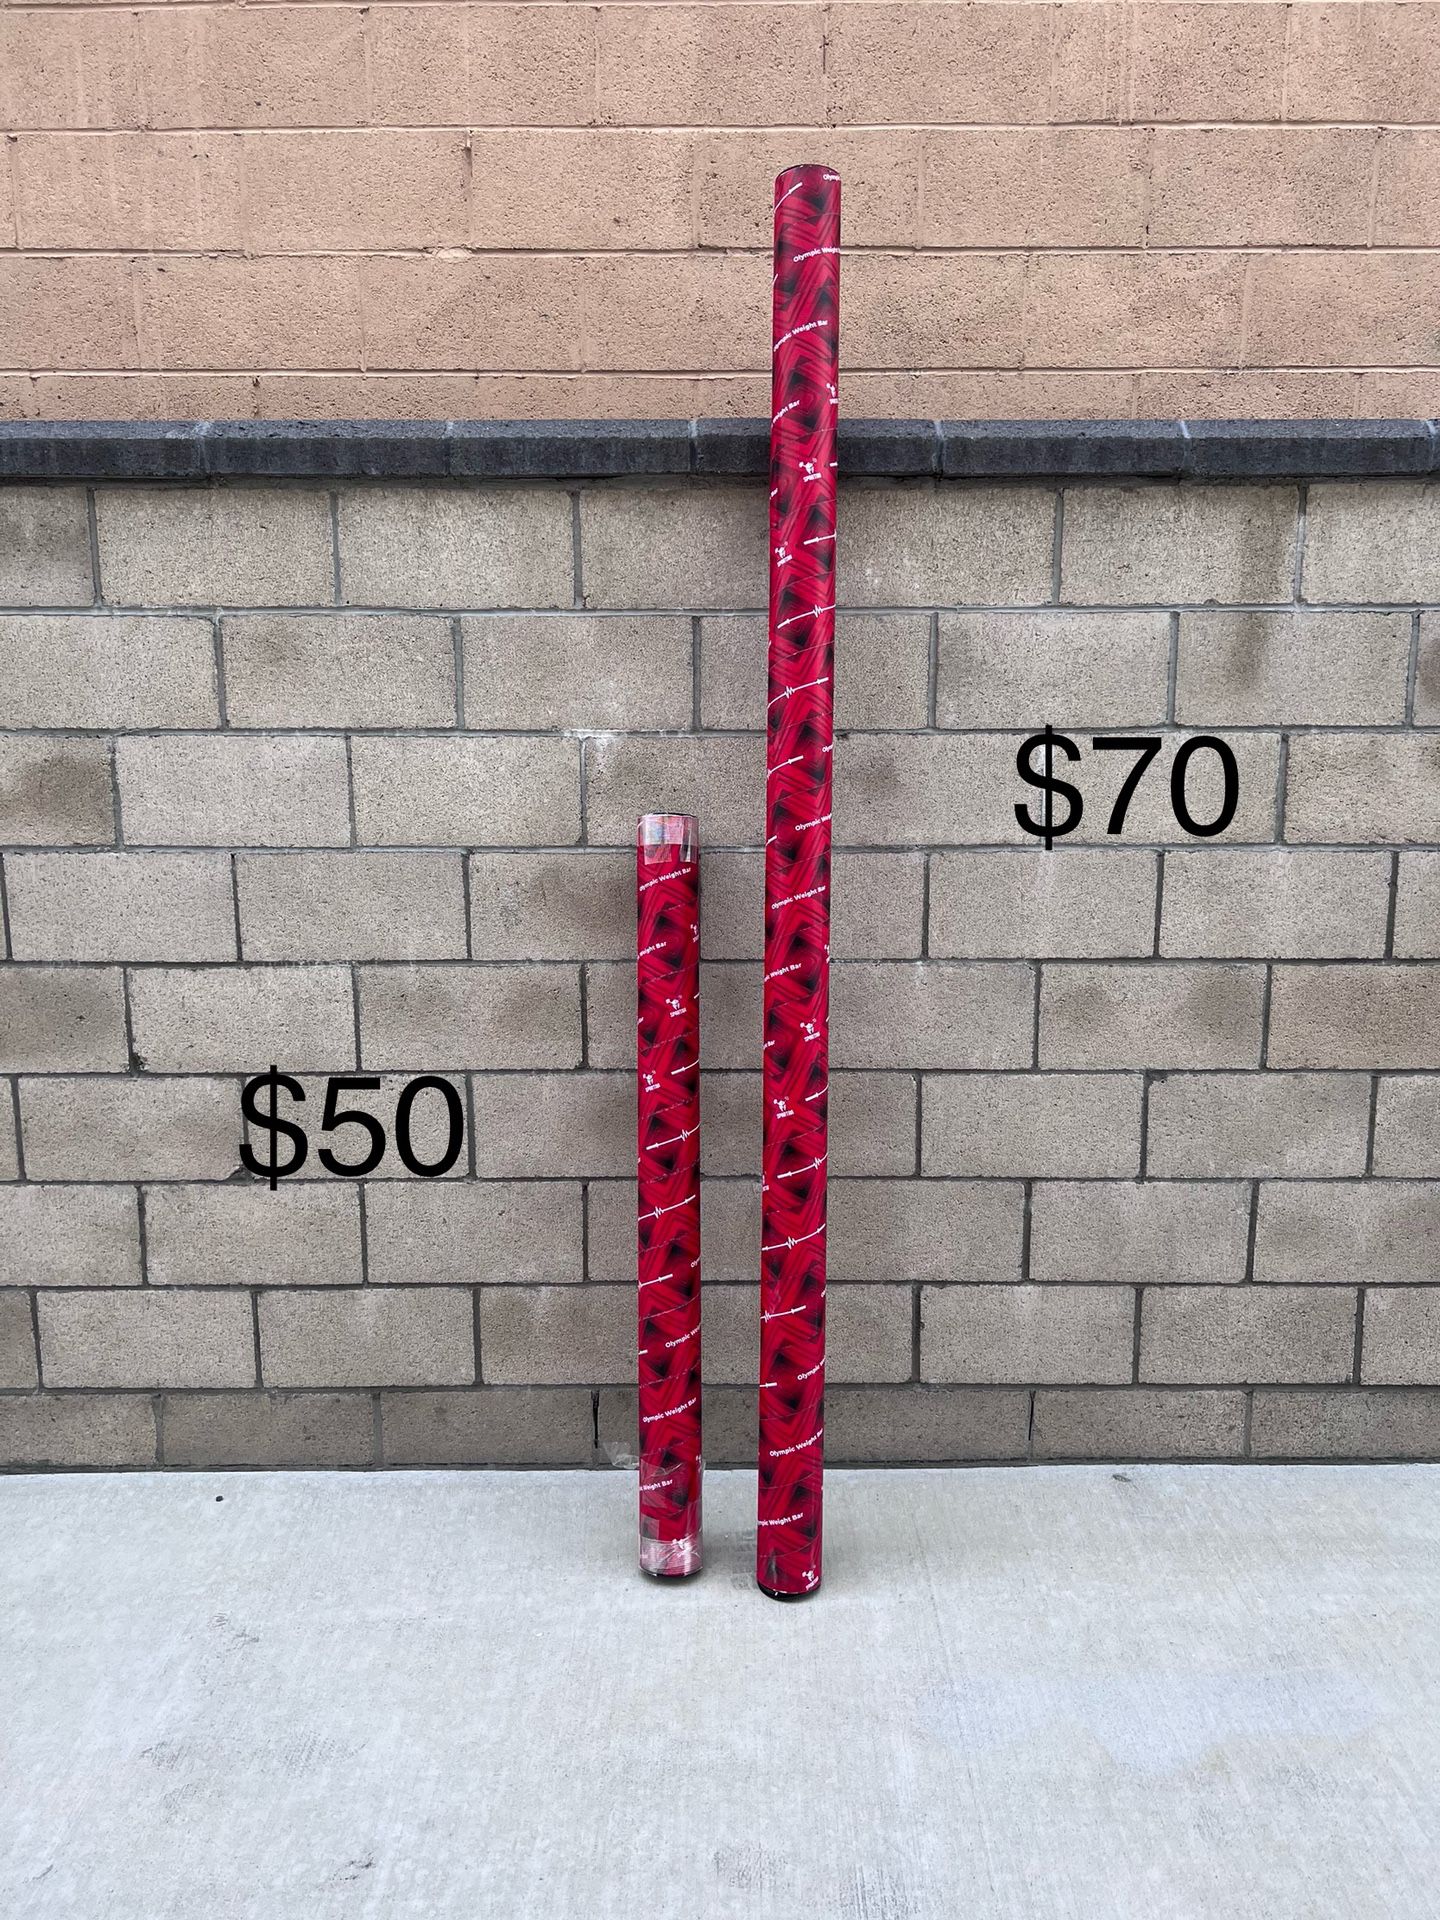 NEW 7’ Olympic Barbell & EZ Curl Bar **See Photo For Pricing, FIRM PRICE**